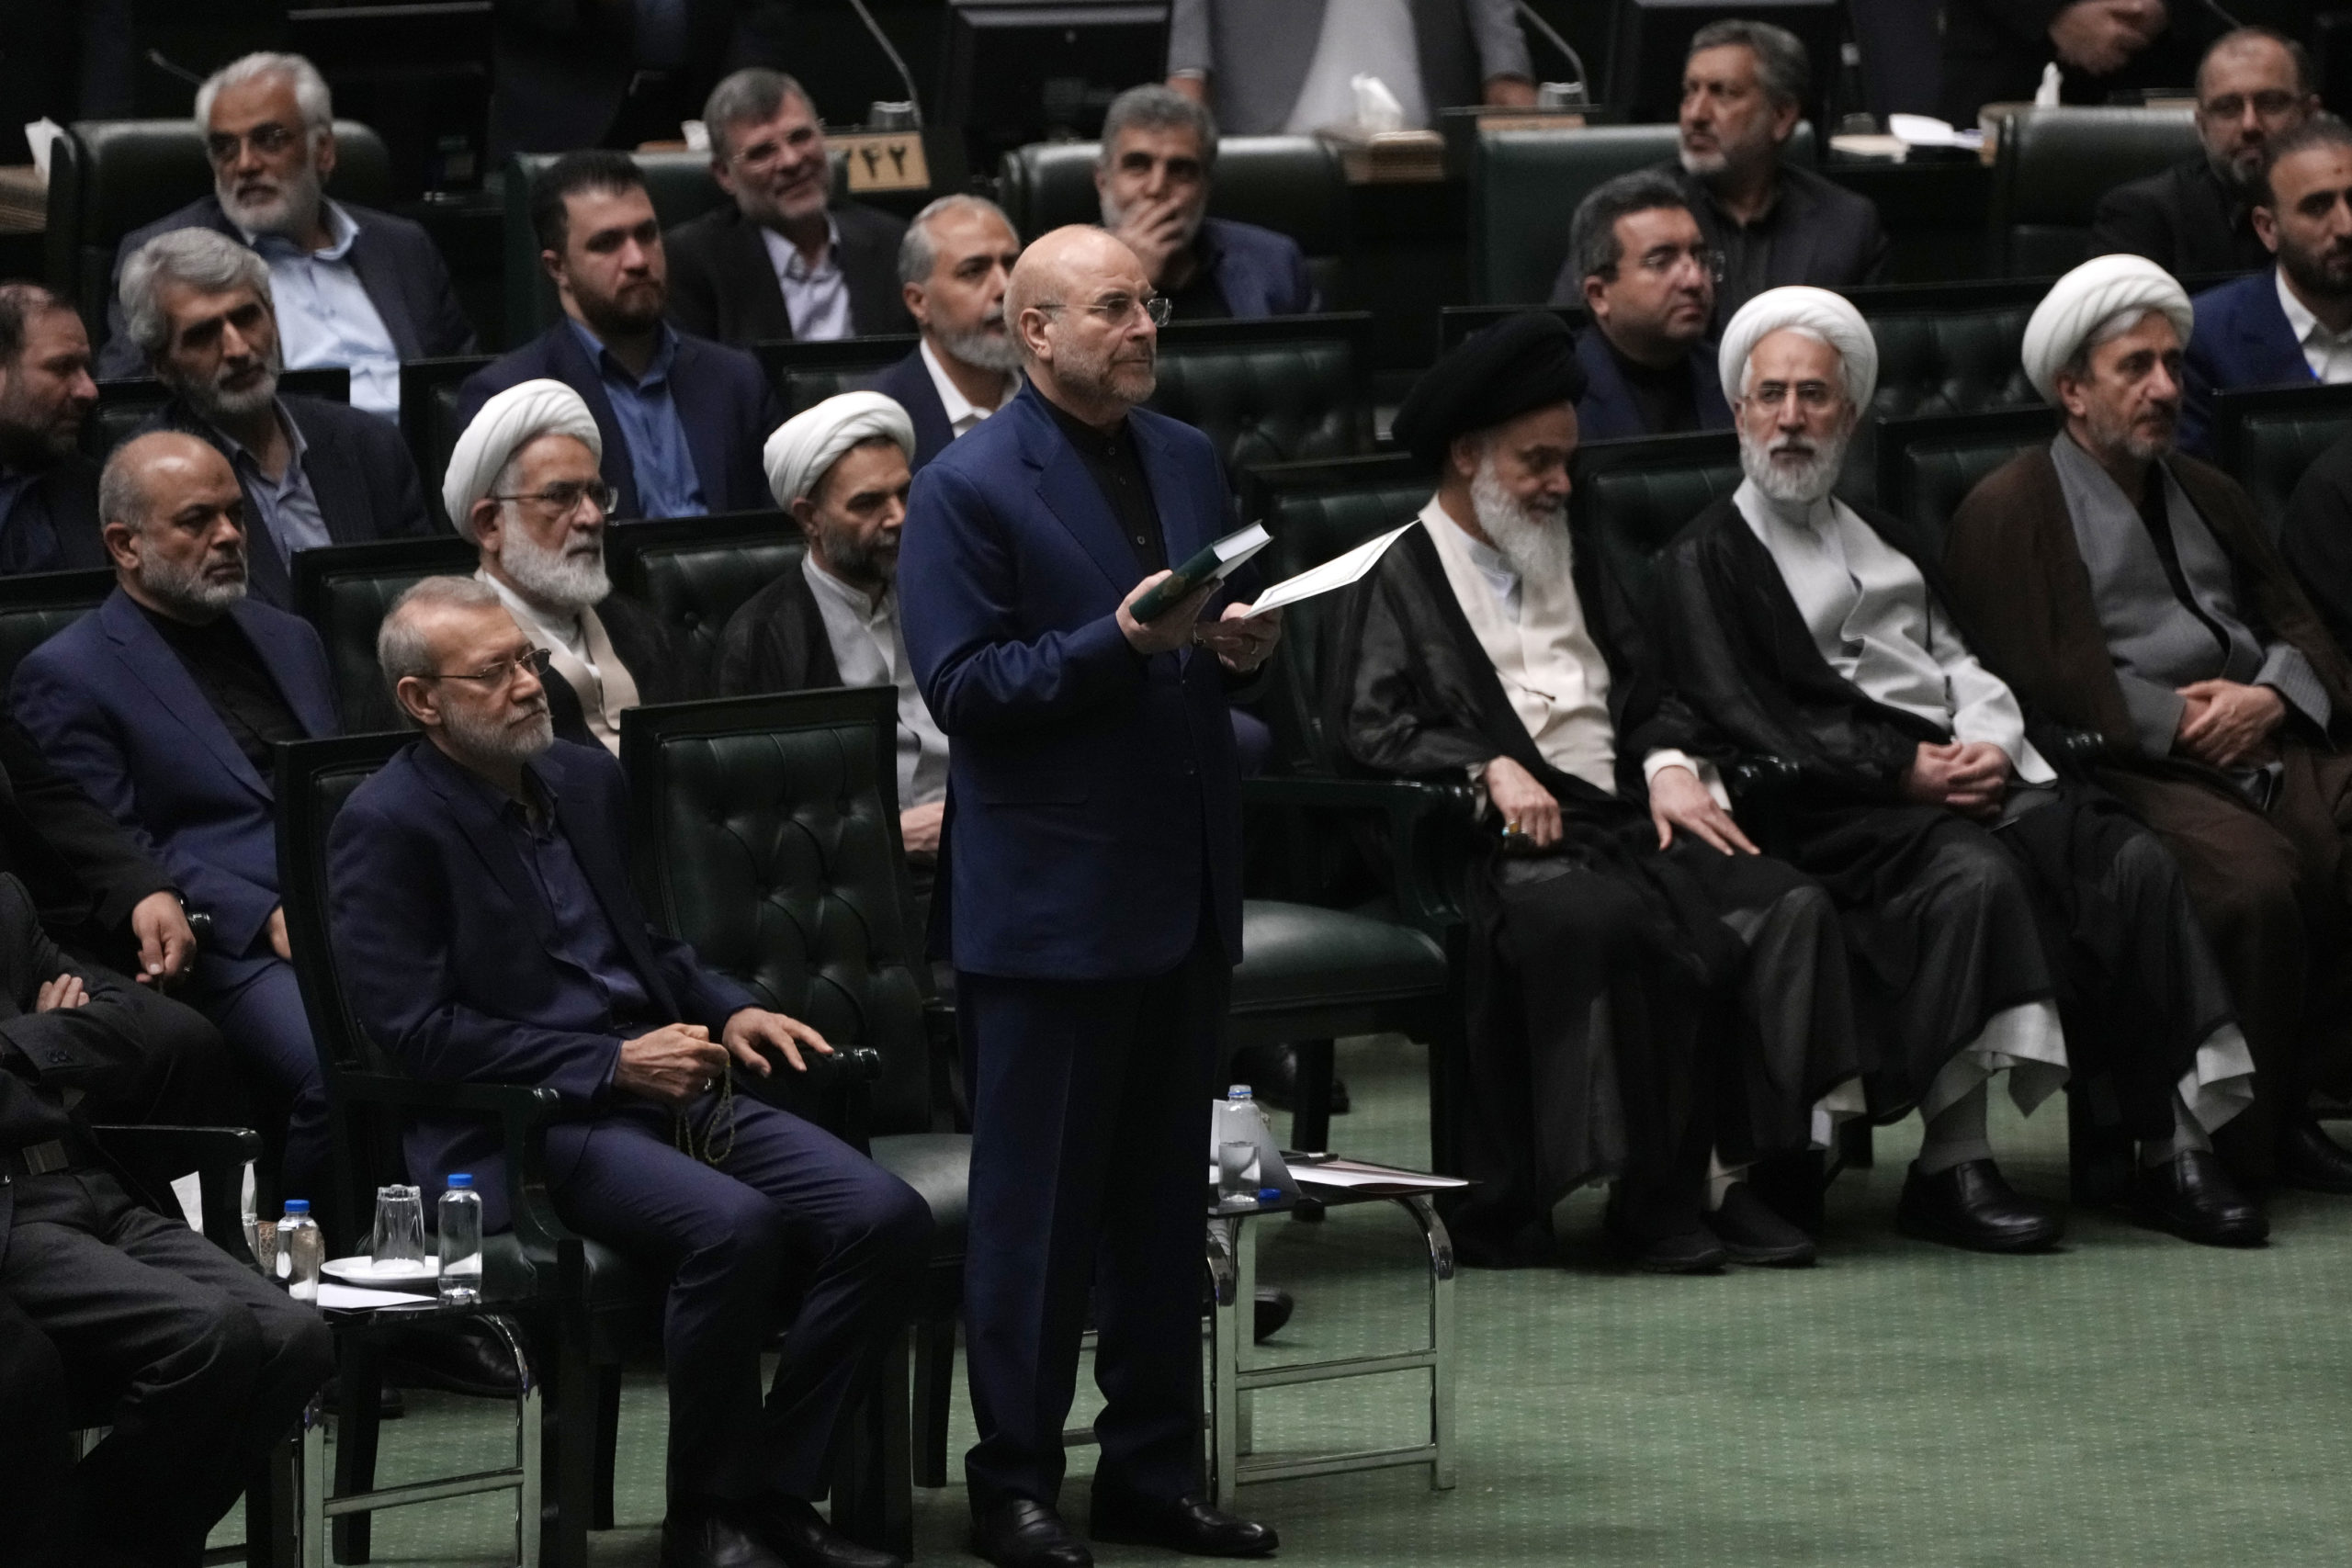 Mohammad Bagher Qalibaf, center, takes an oath during the opening ceremony of the new parliament term in Tehran, Iran, on May 27.